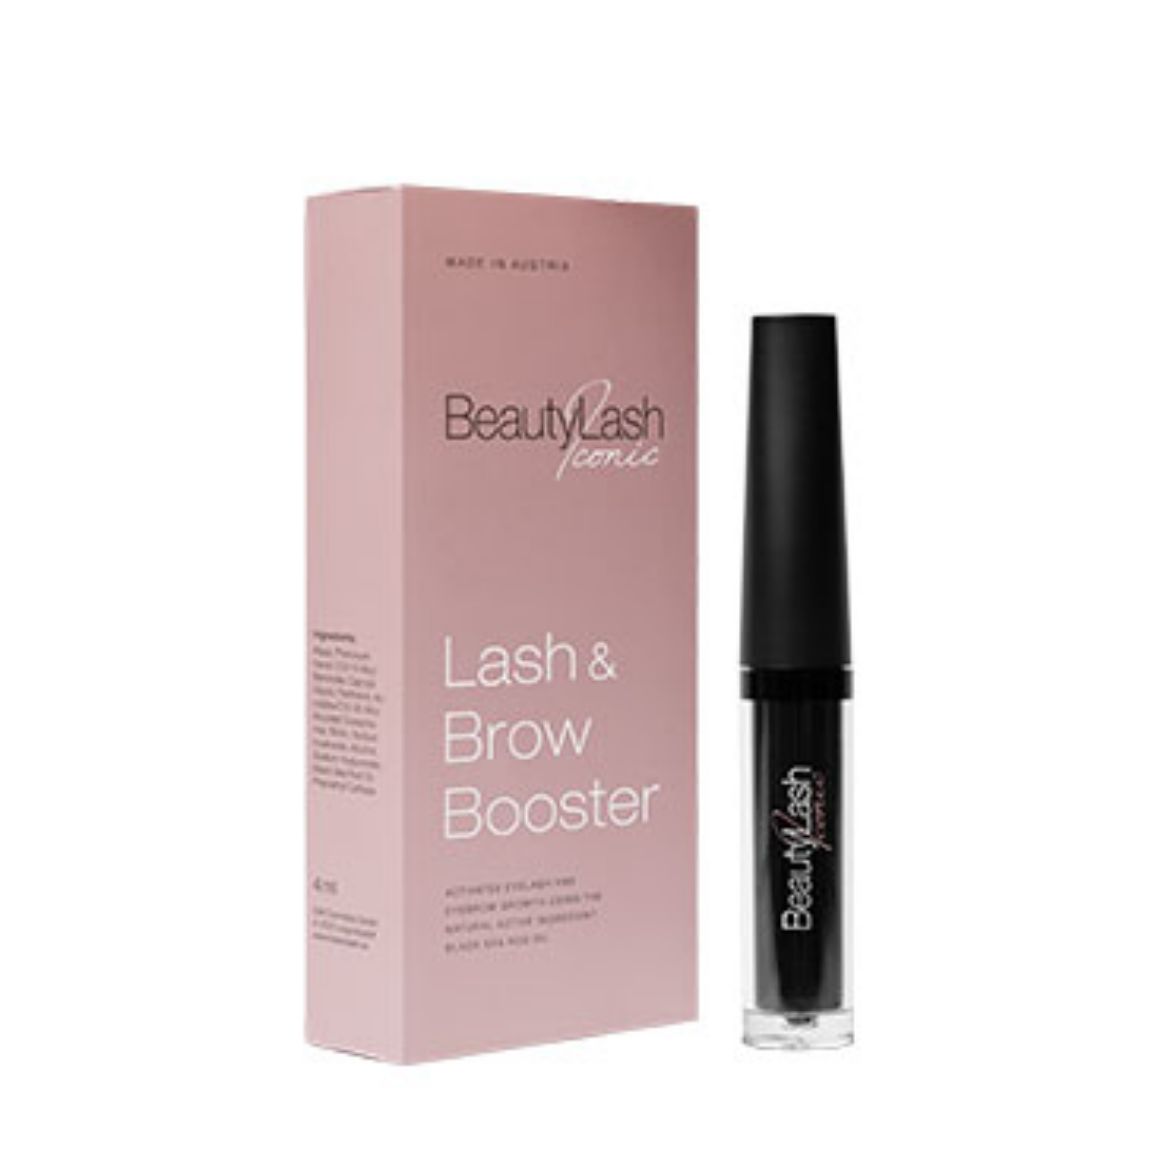 Image of Lash & Brow Booster (4ml)